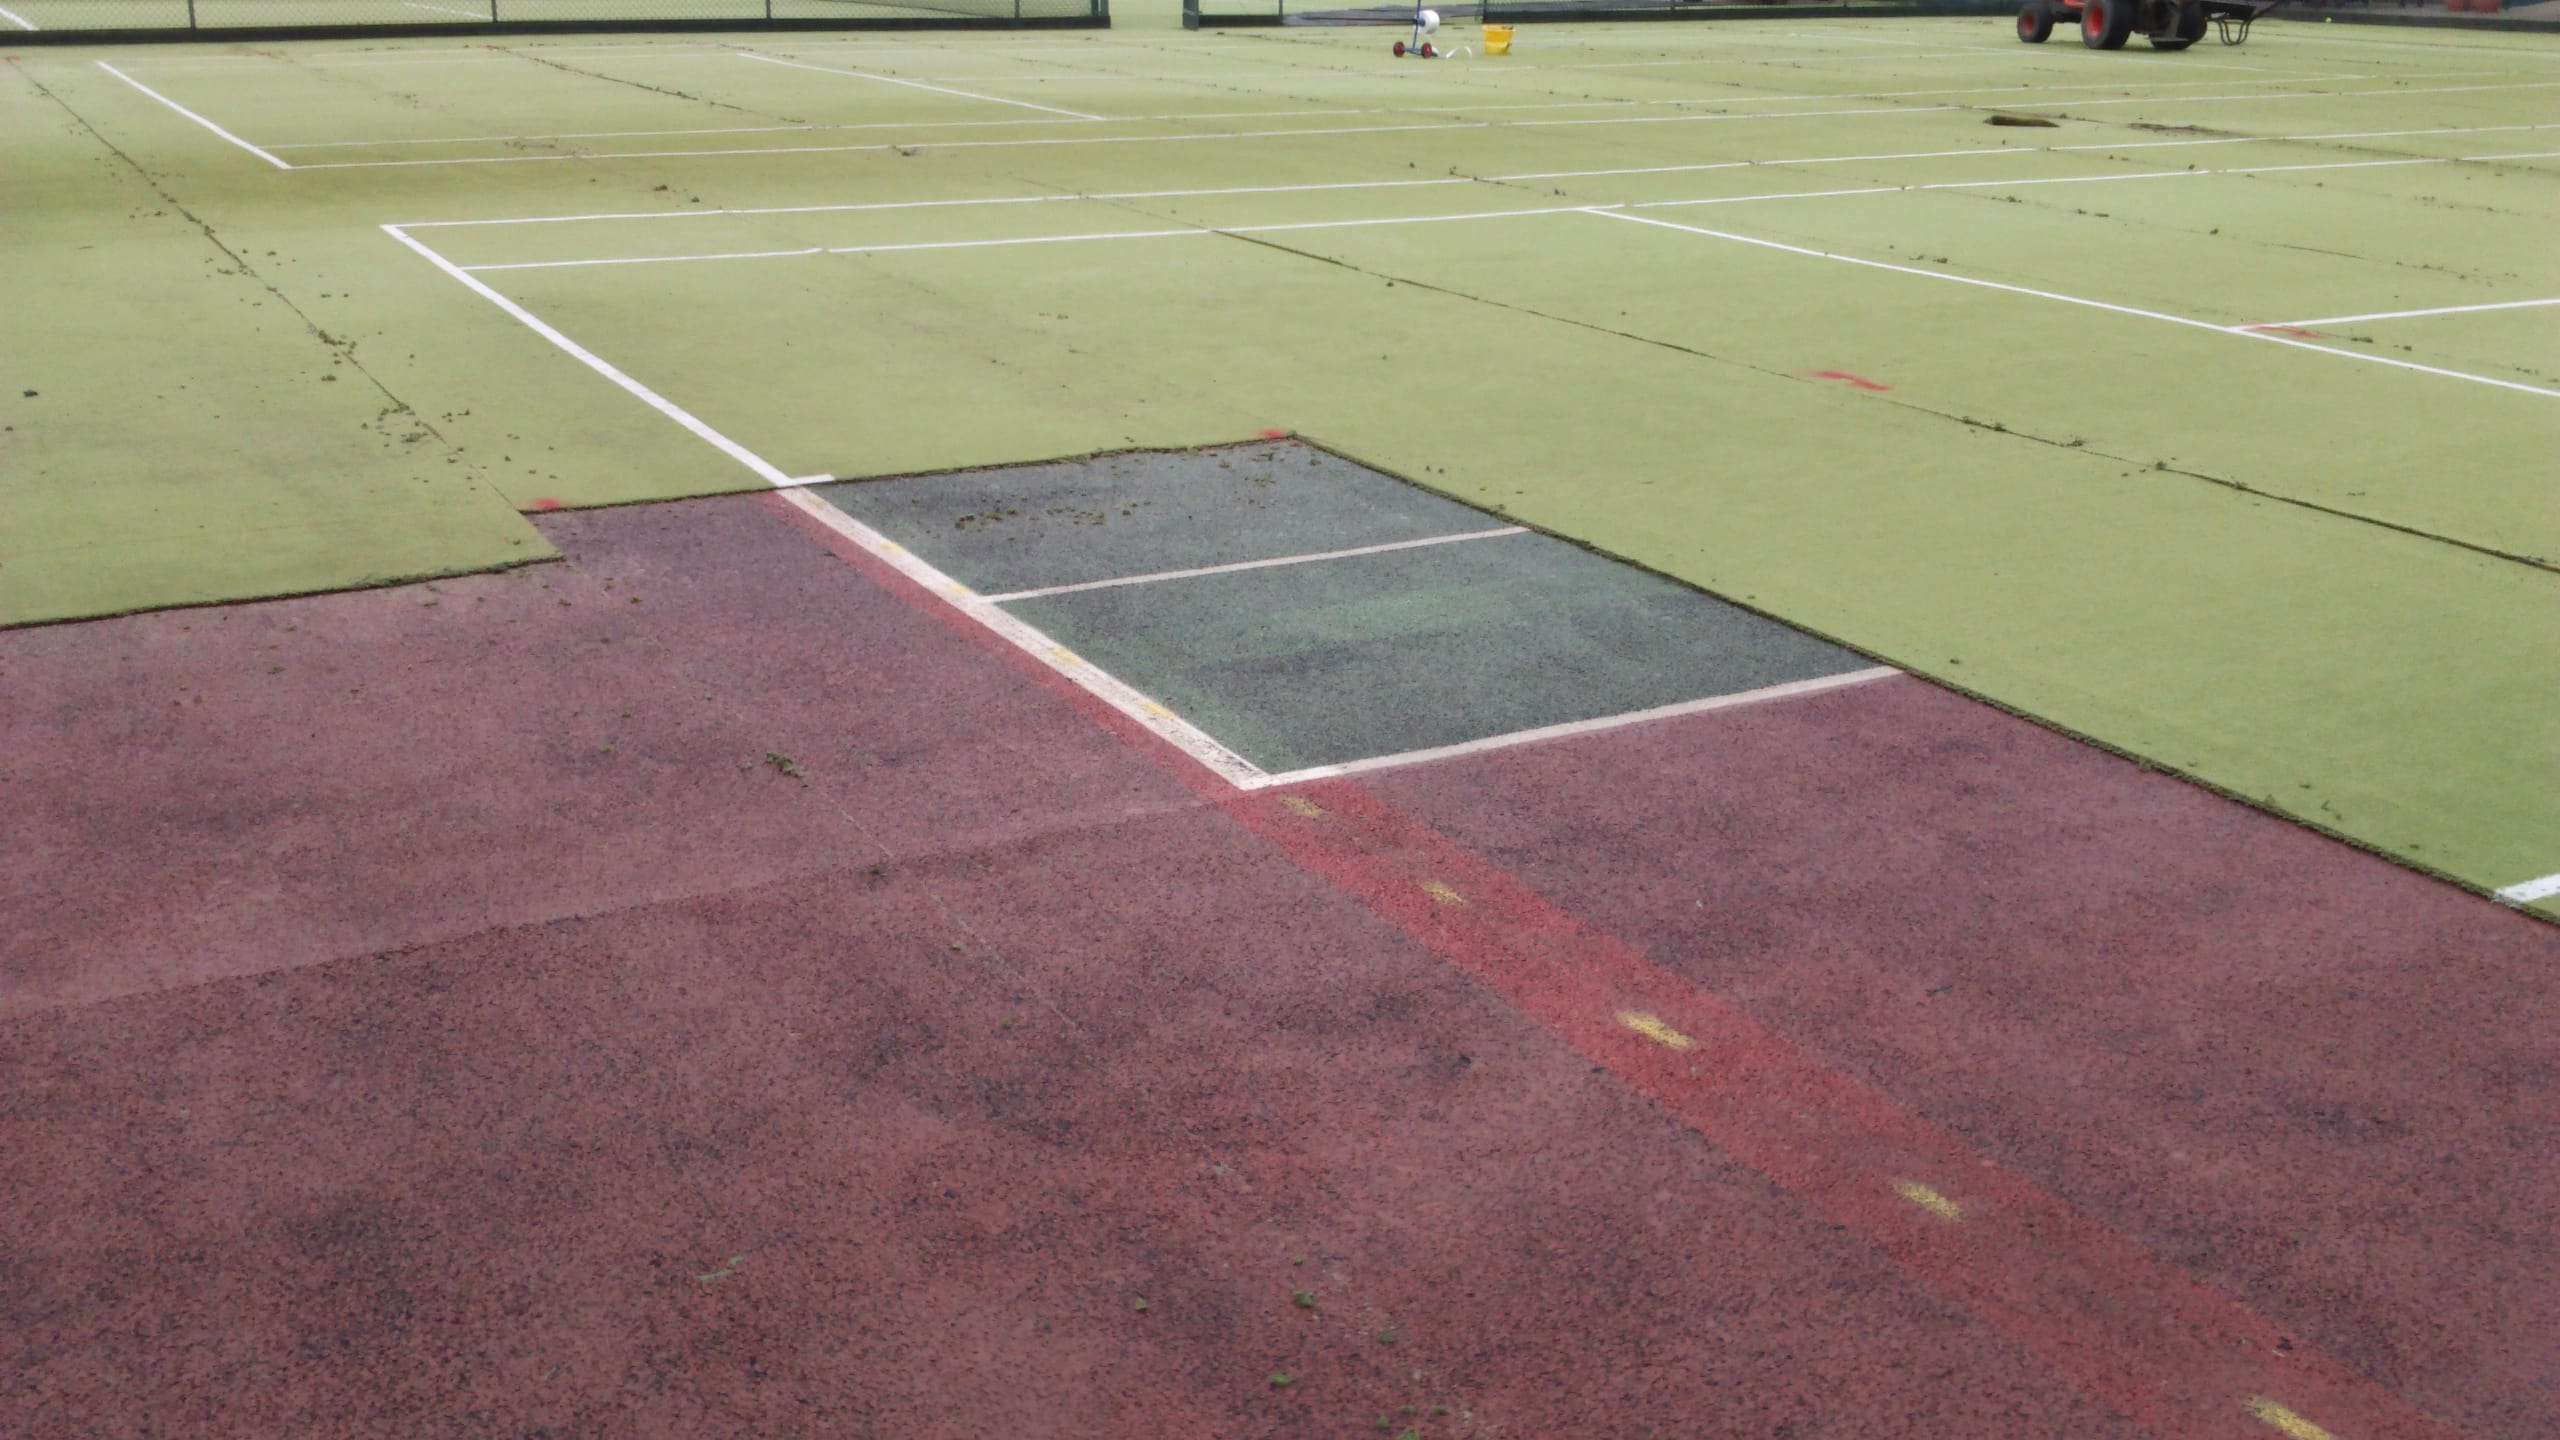 section of the tennis court is removed